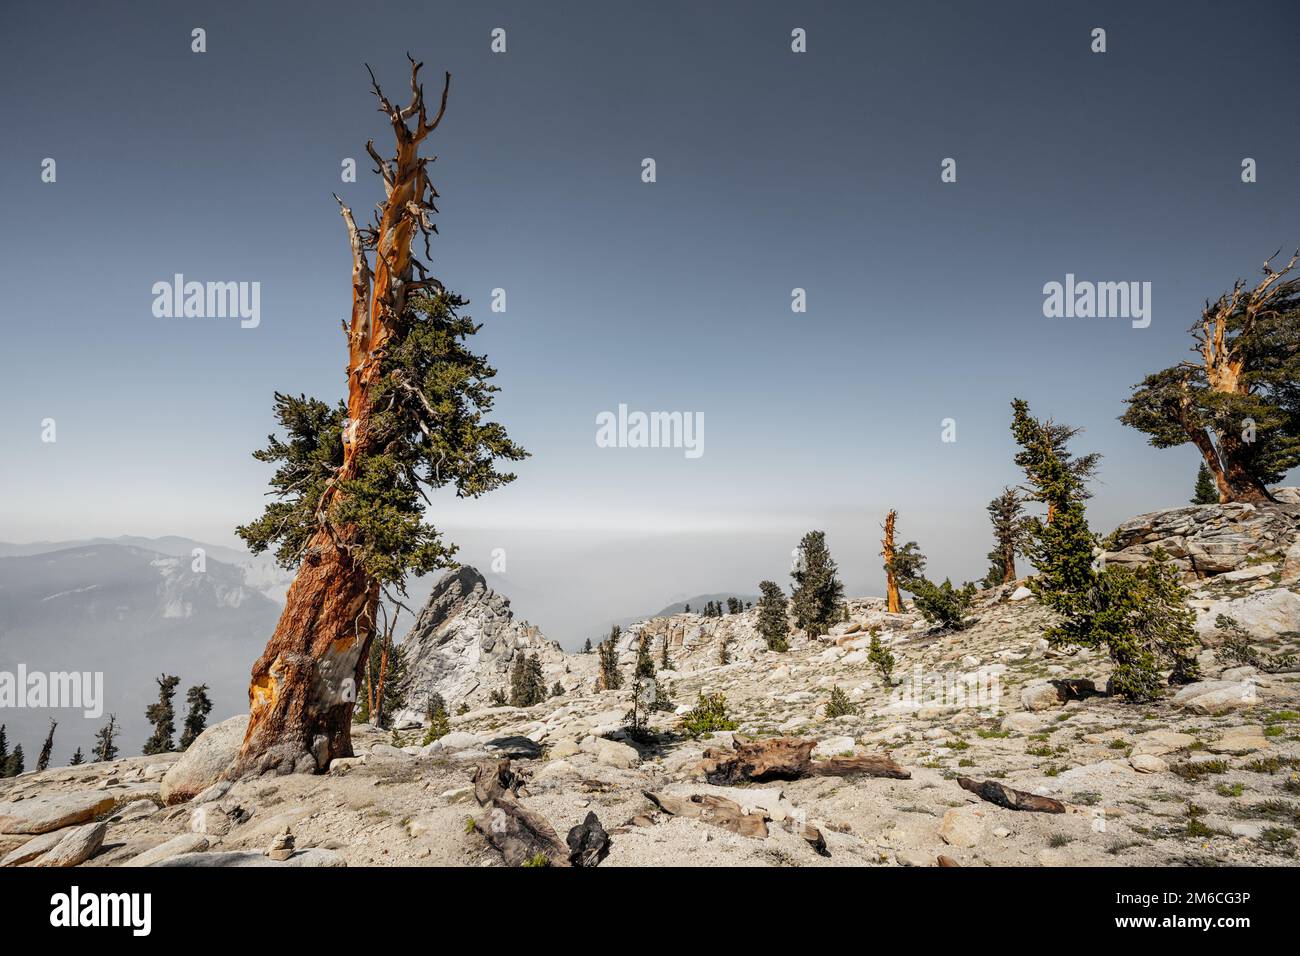 Foxtail Pine Trees Across the Rocky Slopes of the Sierra Mountains in Sequoia National Park Stock Photo